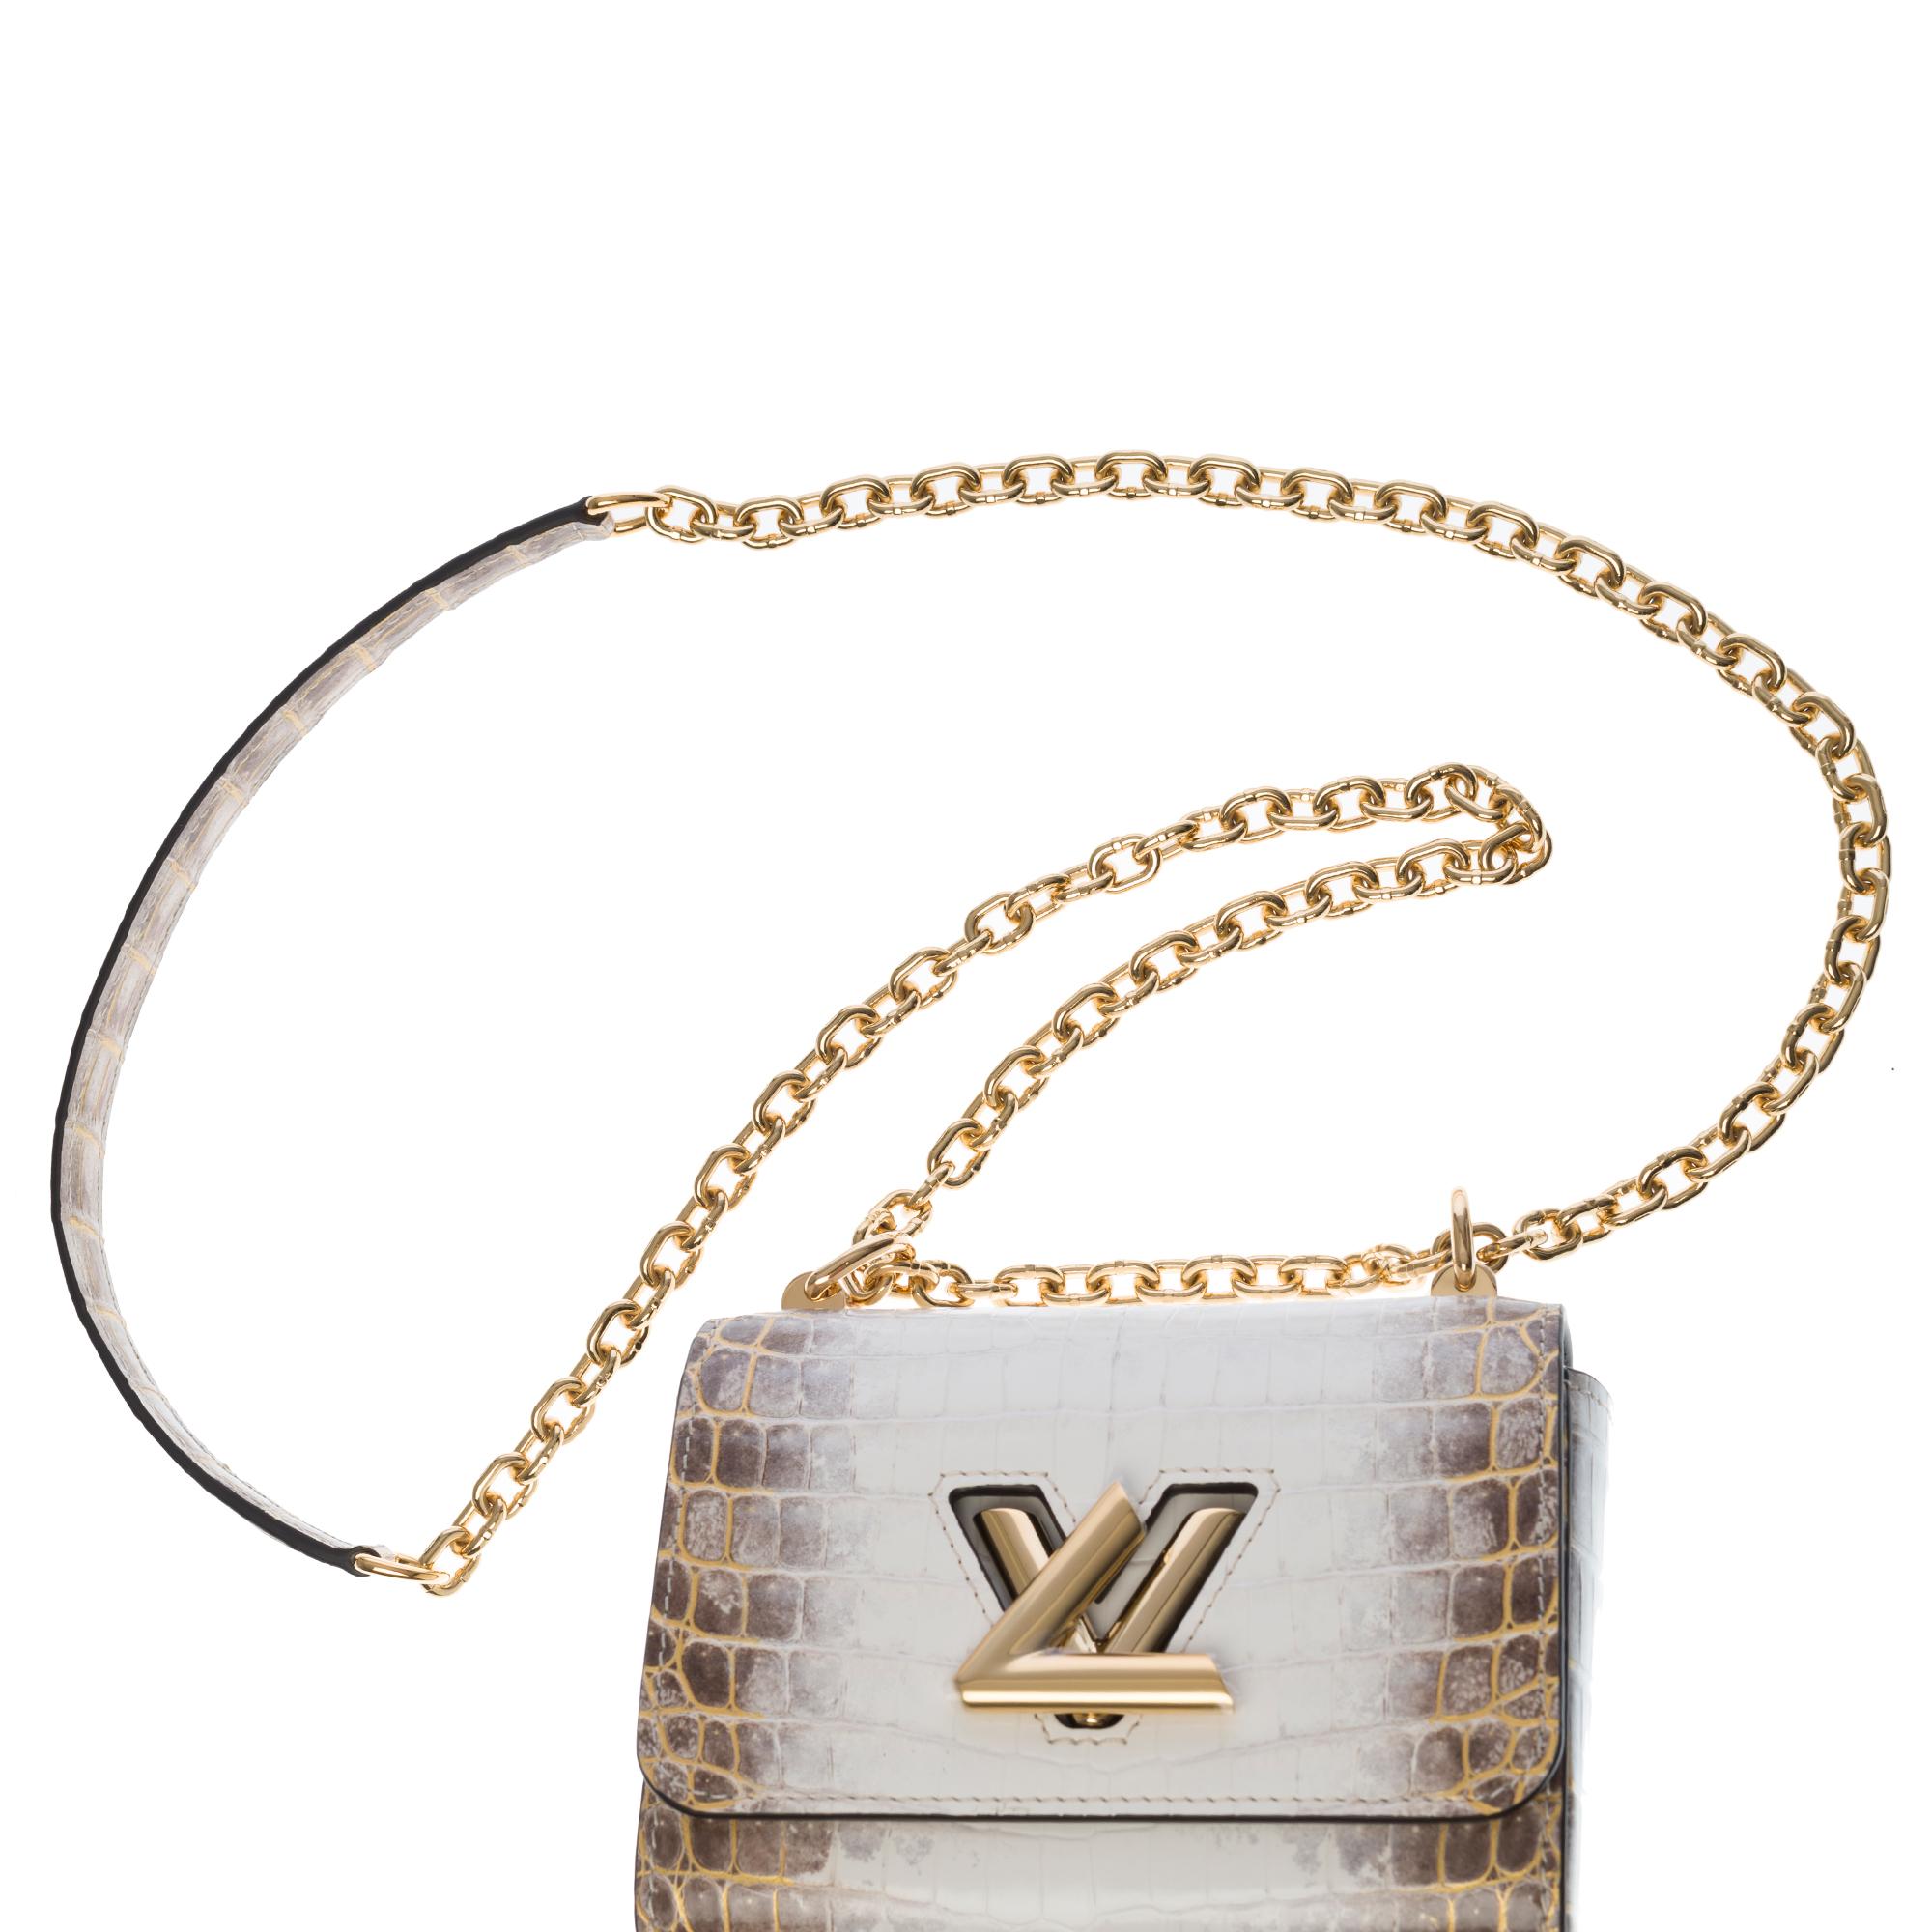 NEW Louis Vuitton Mini Twist shoulder bag in White Crocodile leather and GHW 3